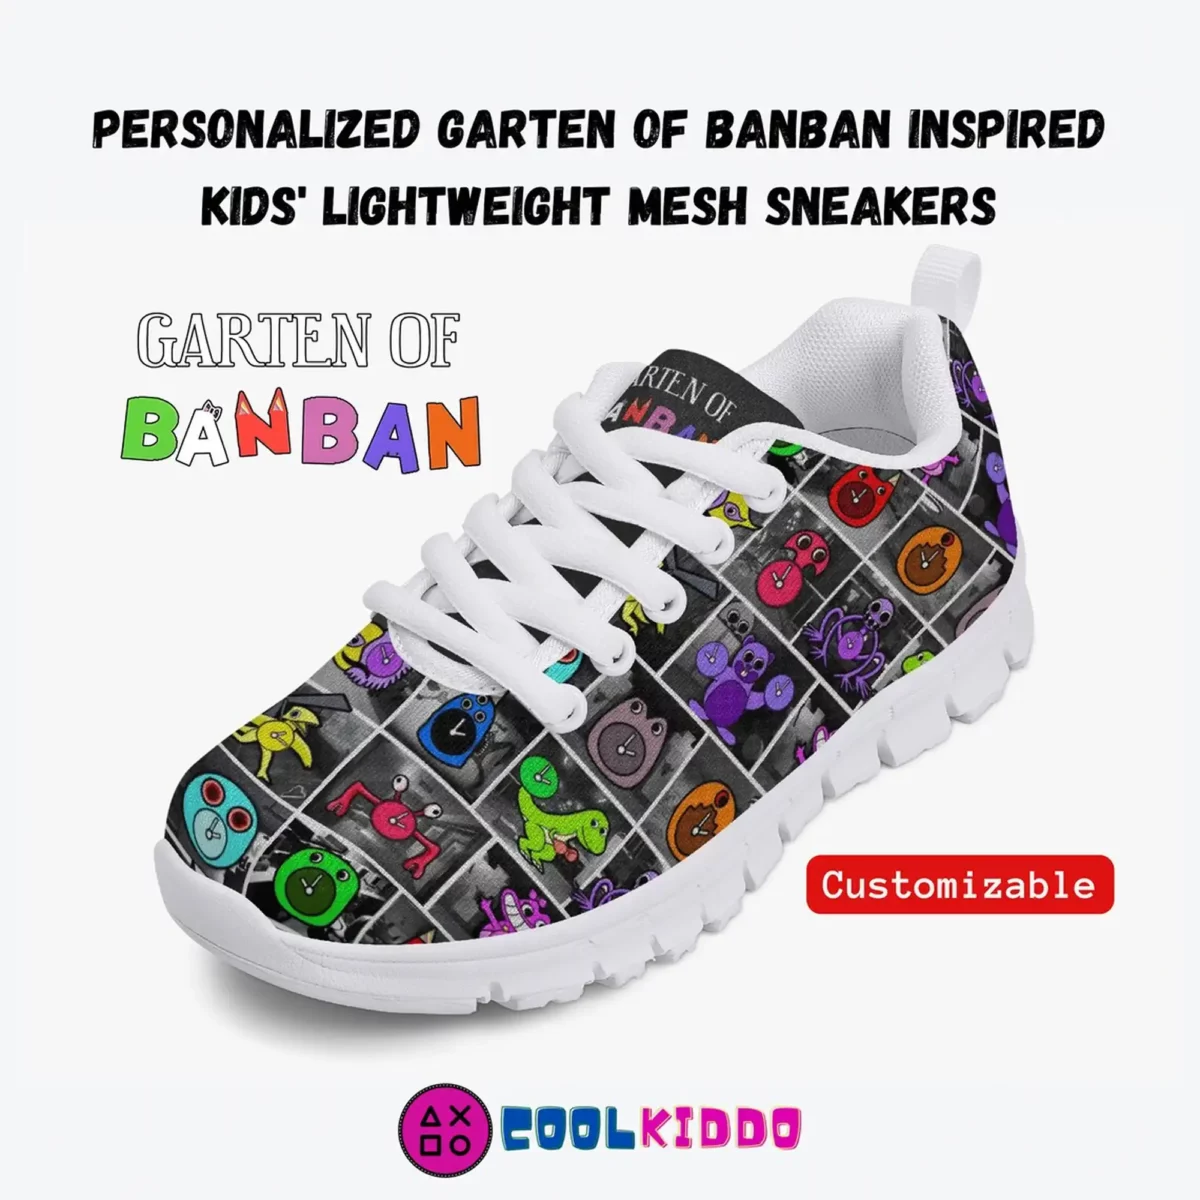 Personalized Garten of Banban Video Game Inspired Lightweight Mesh Blue Sneakers for kids/youth Cool Kiddo 10